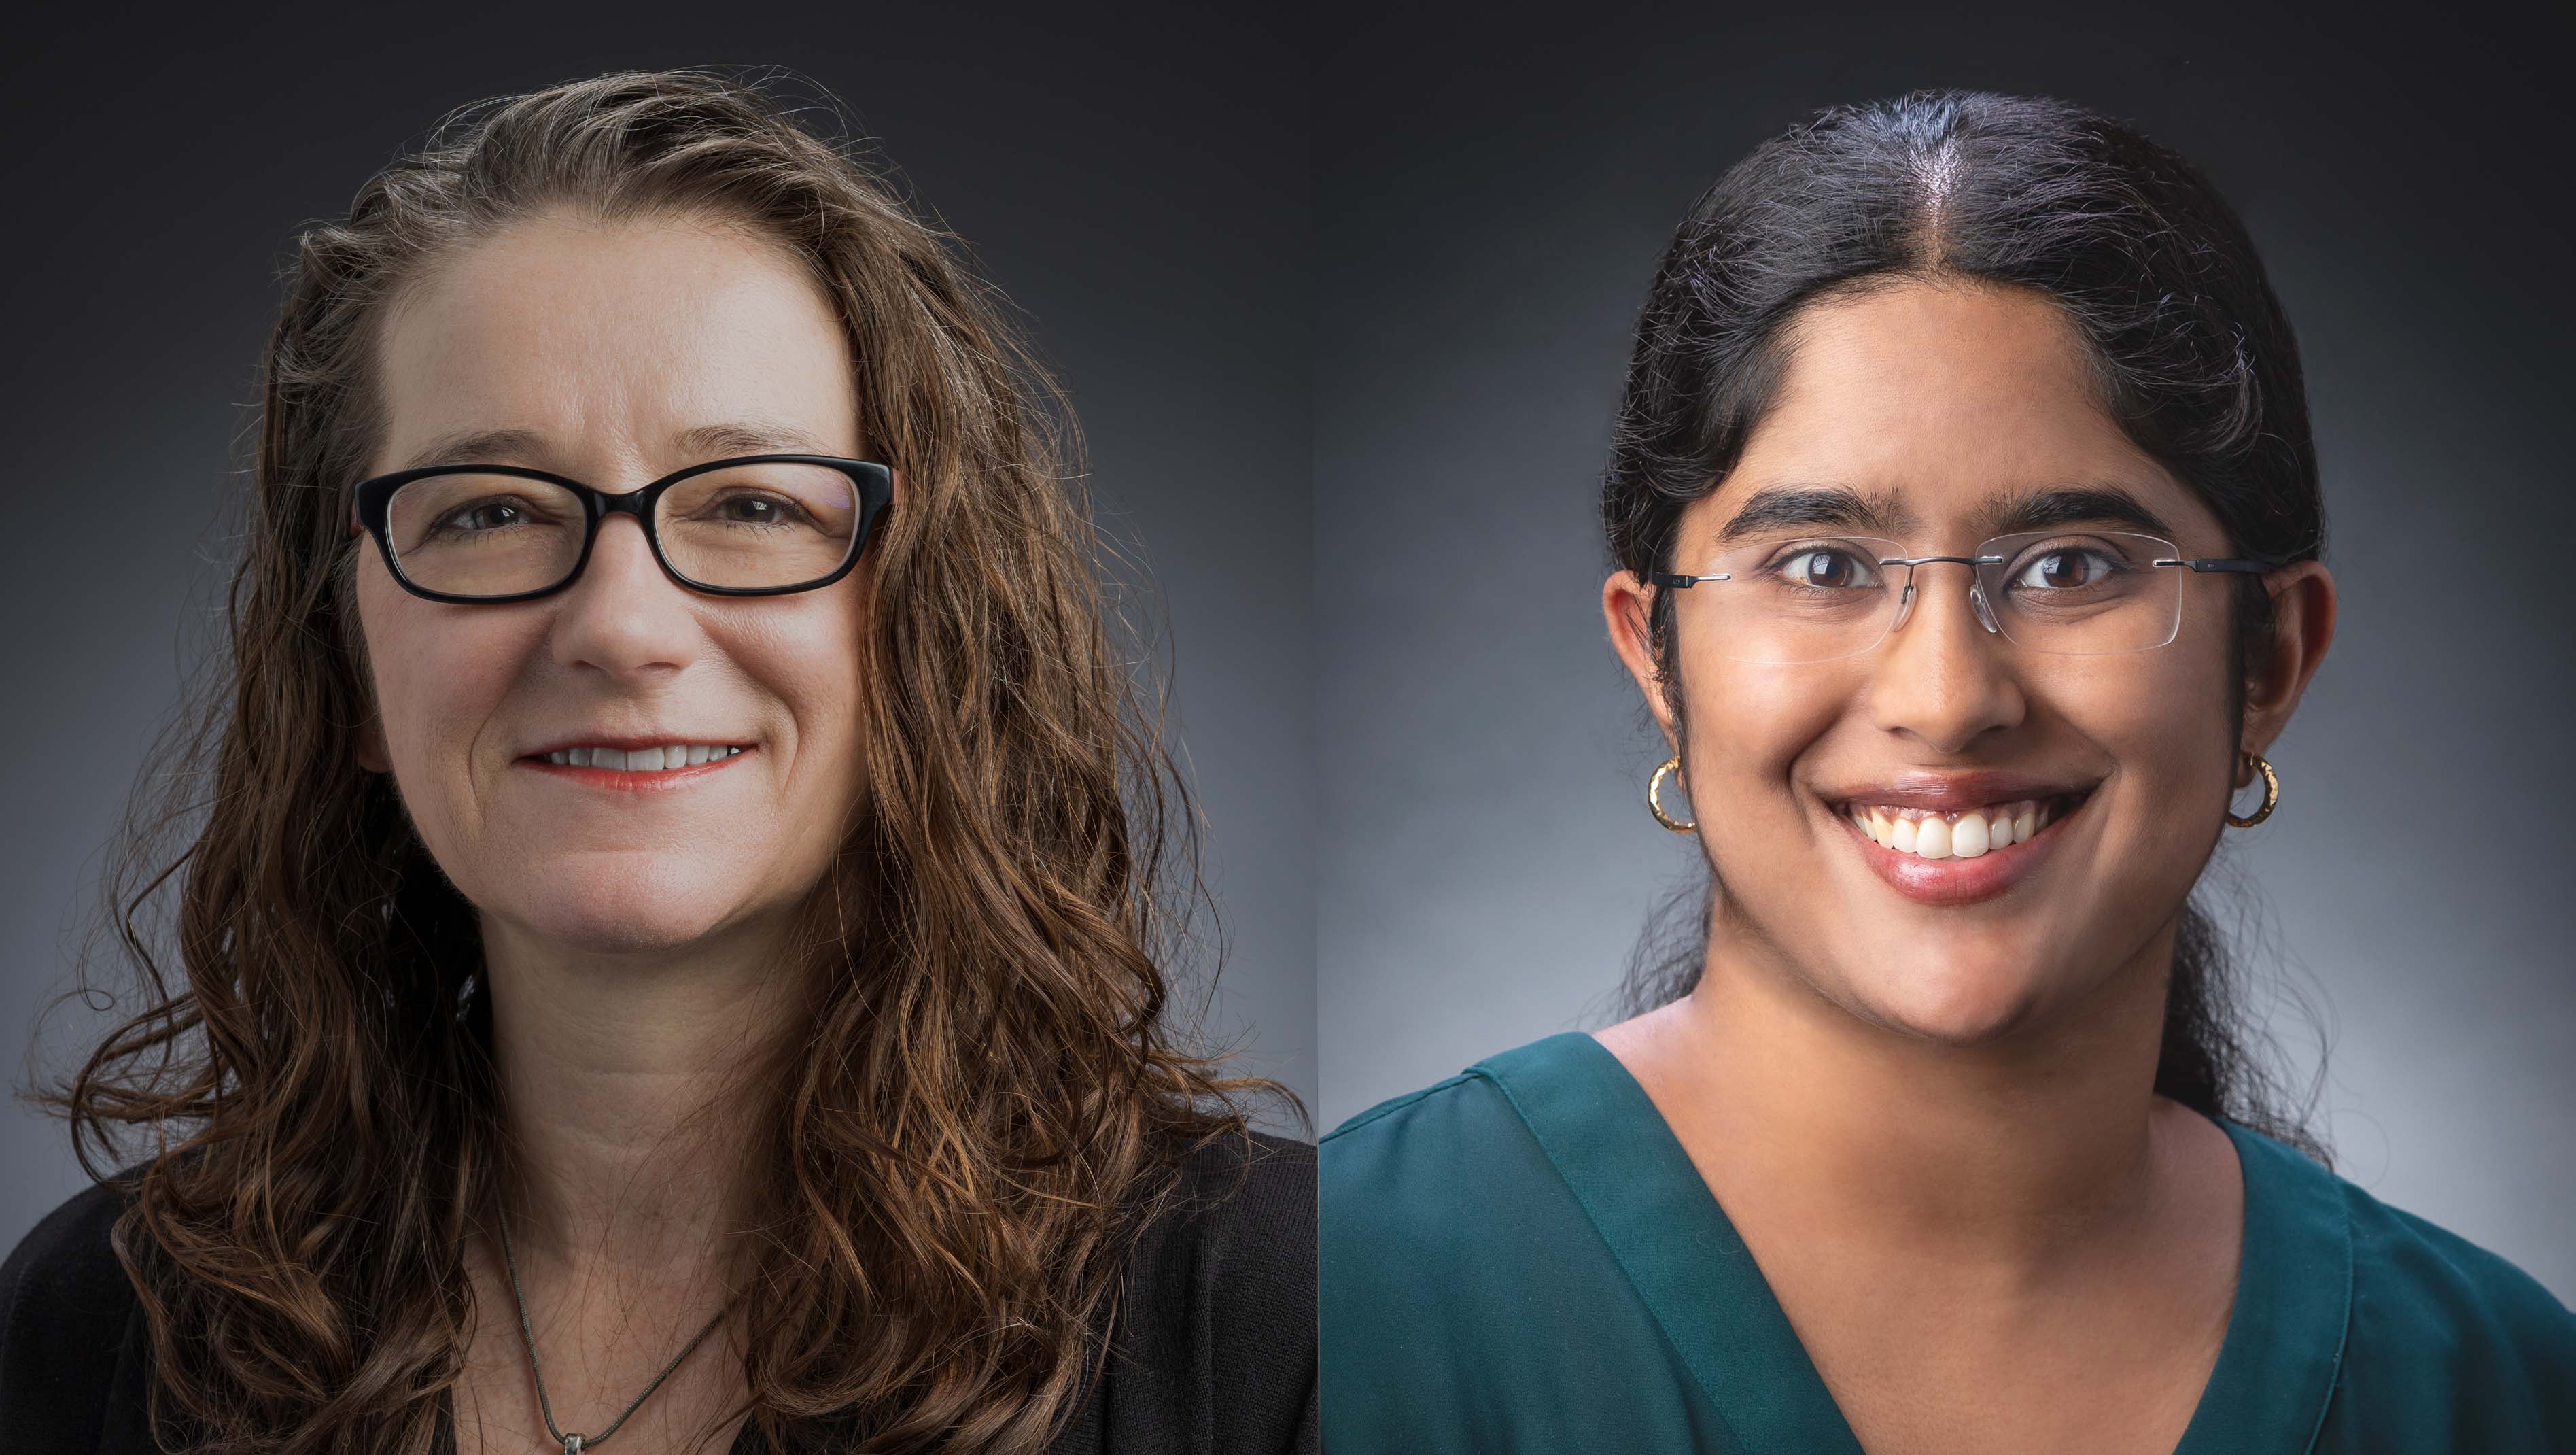 Profile images of two women, Kathy Mandt and Parvathy Prem